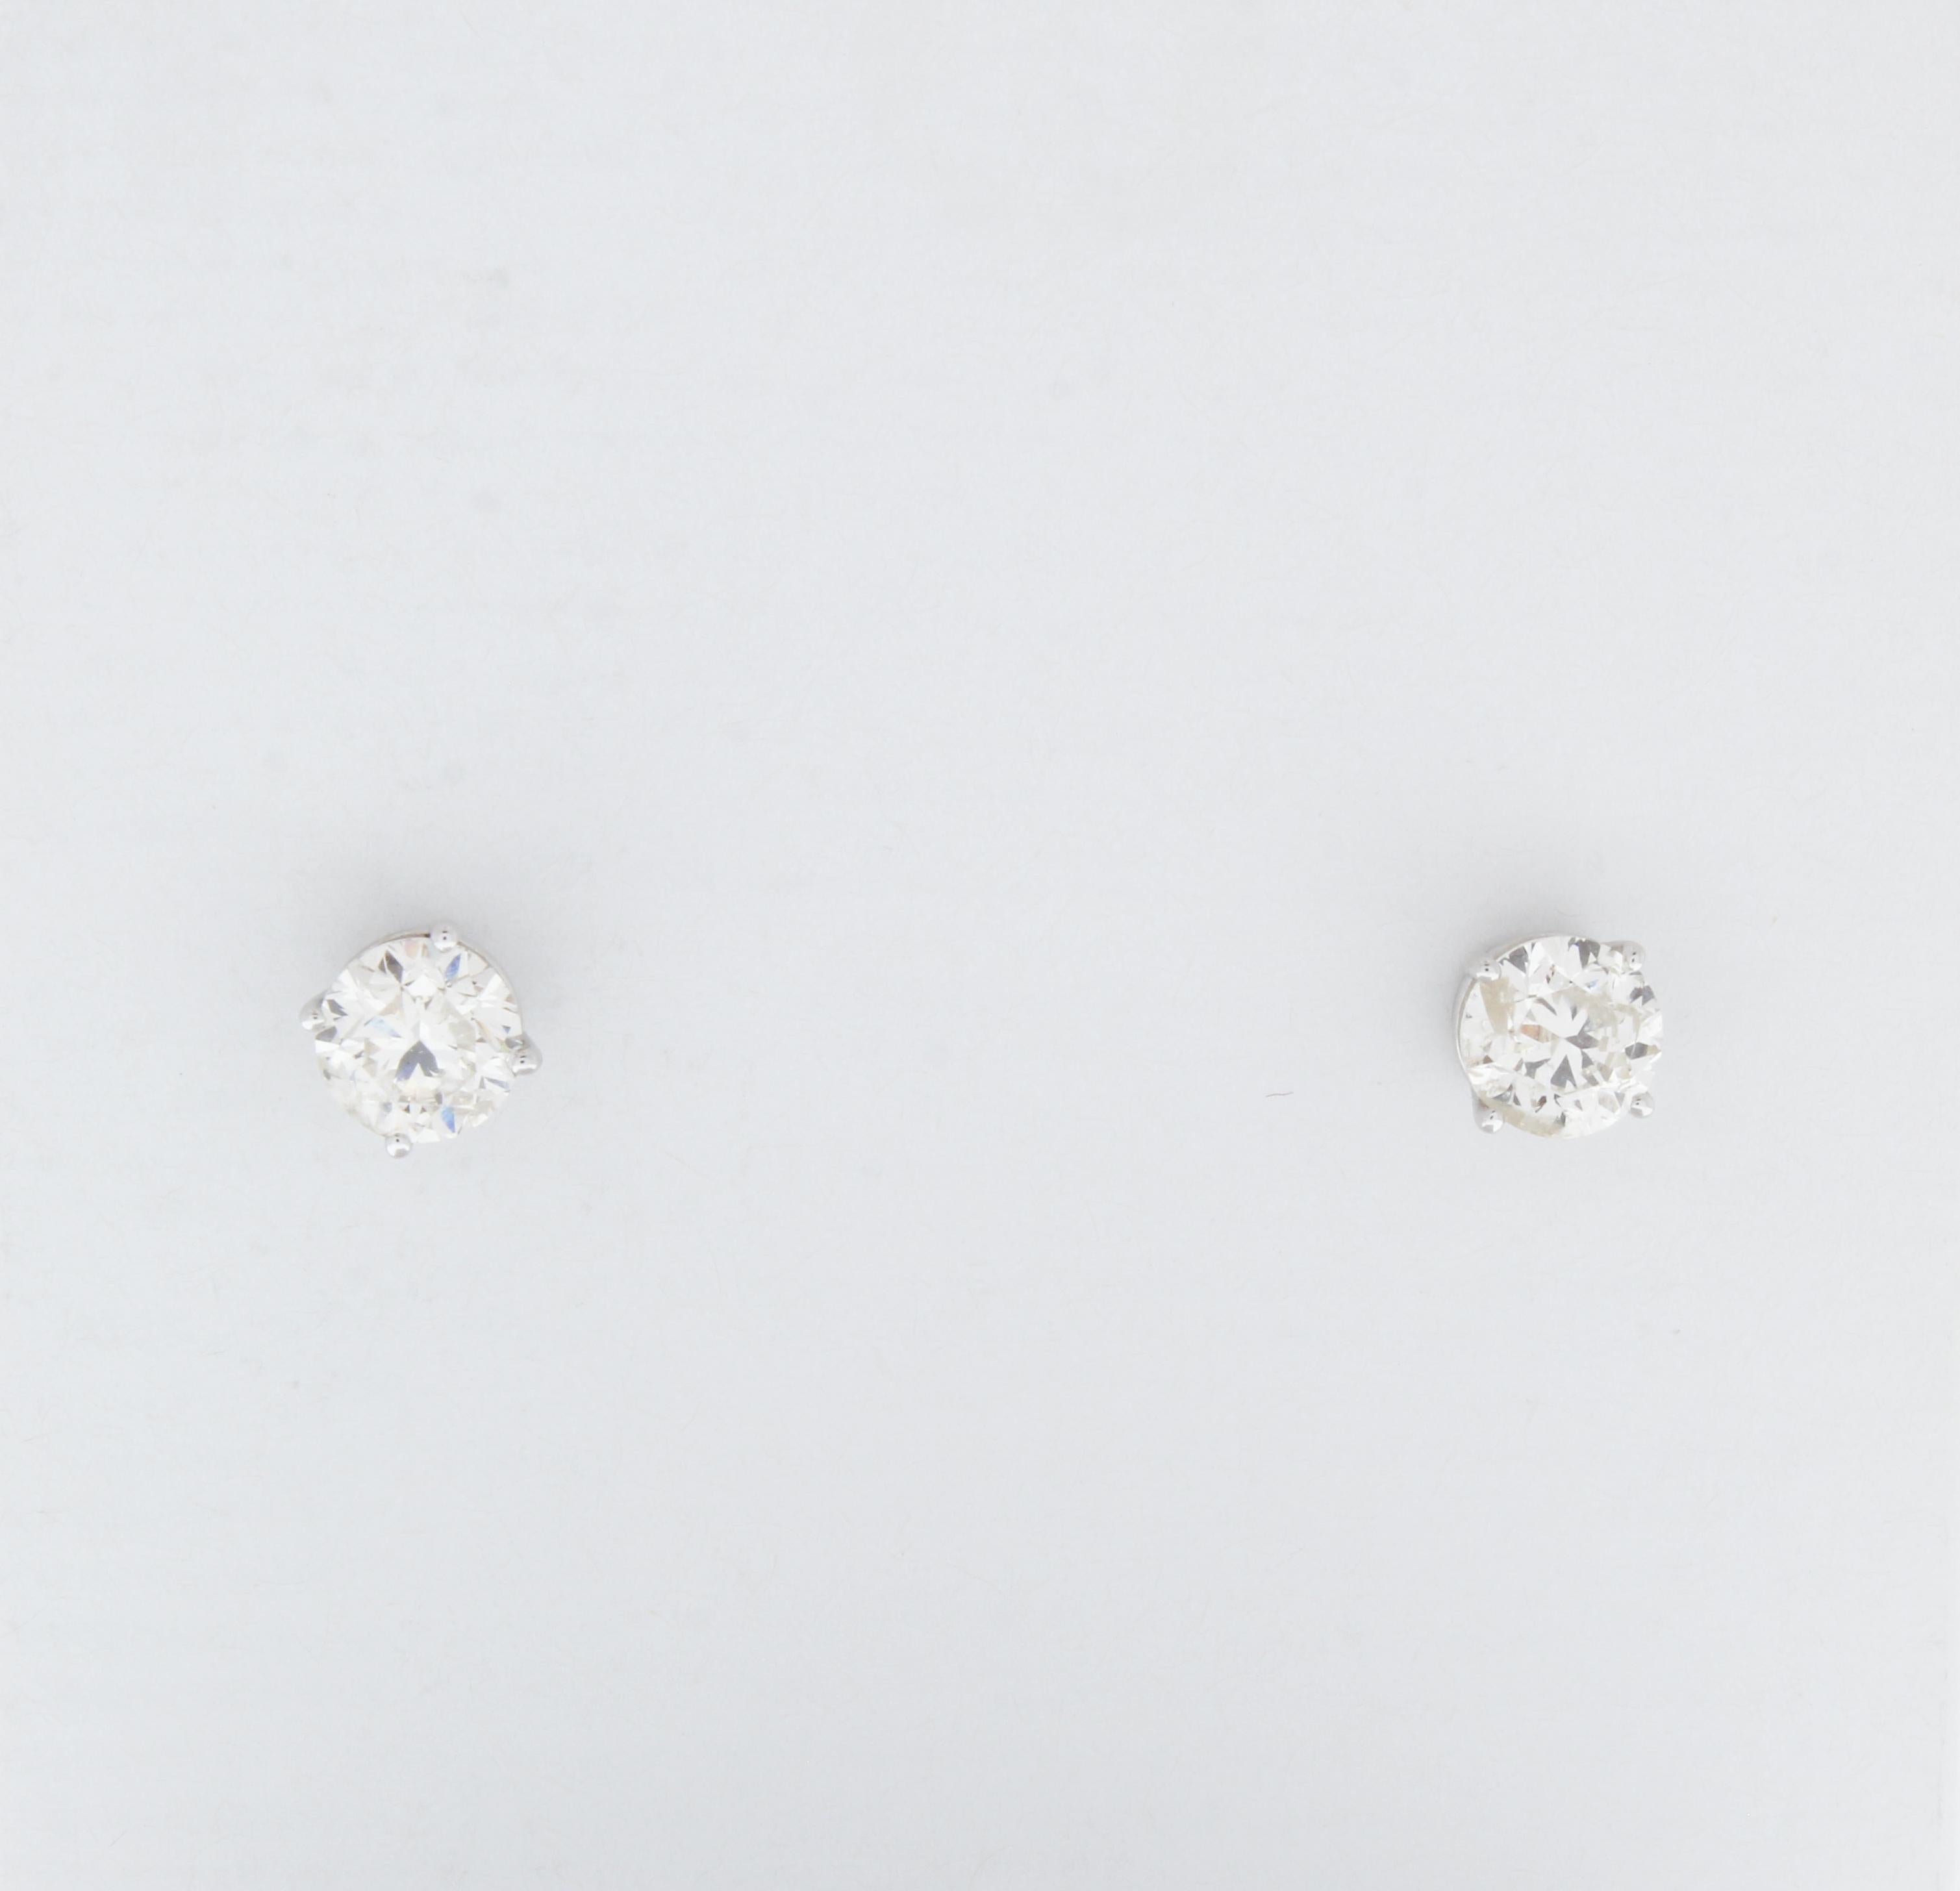 2.00 Carat Total Weight Diamond Stud Earrings in 14k White Gold In New Condition For Sale In Chicago, IL